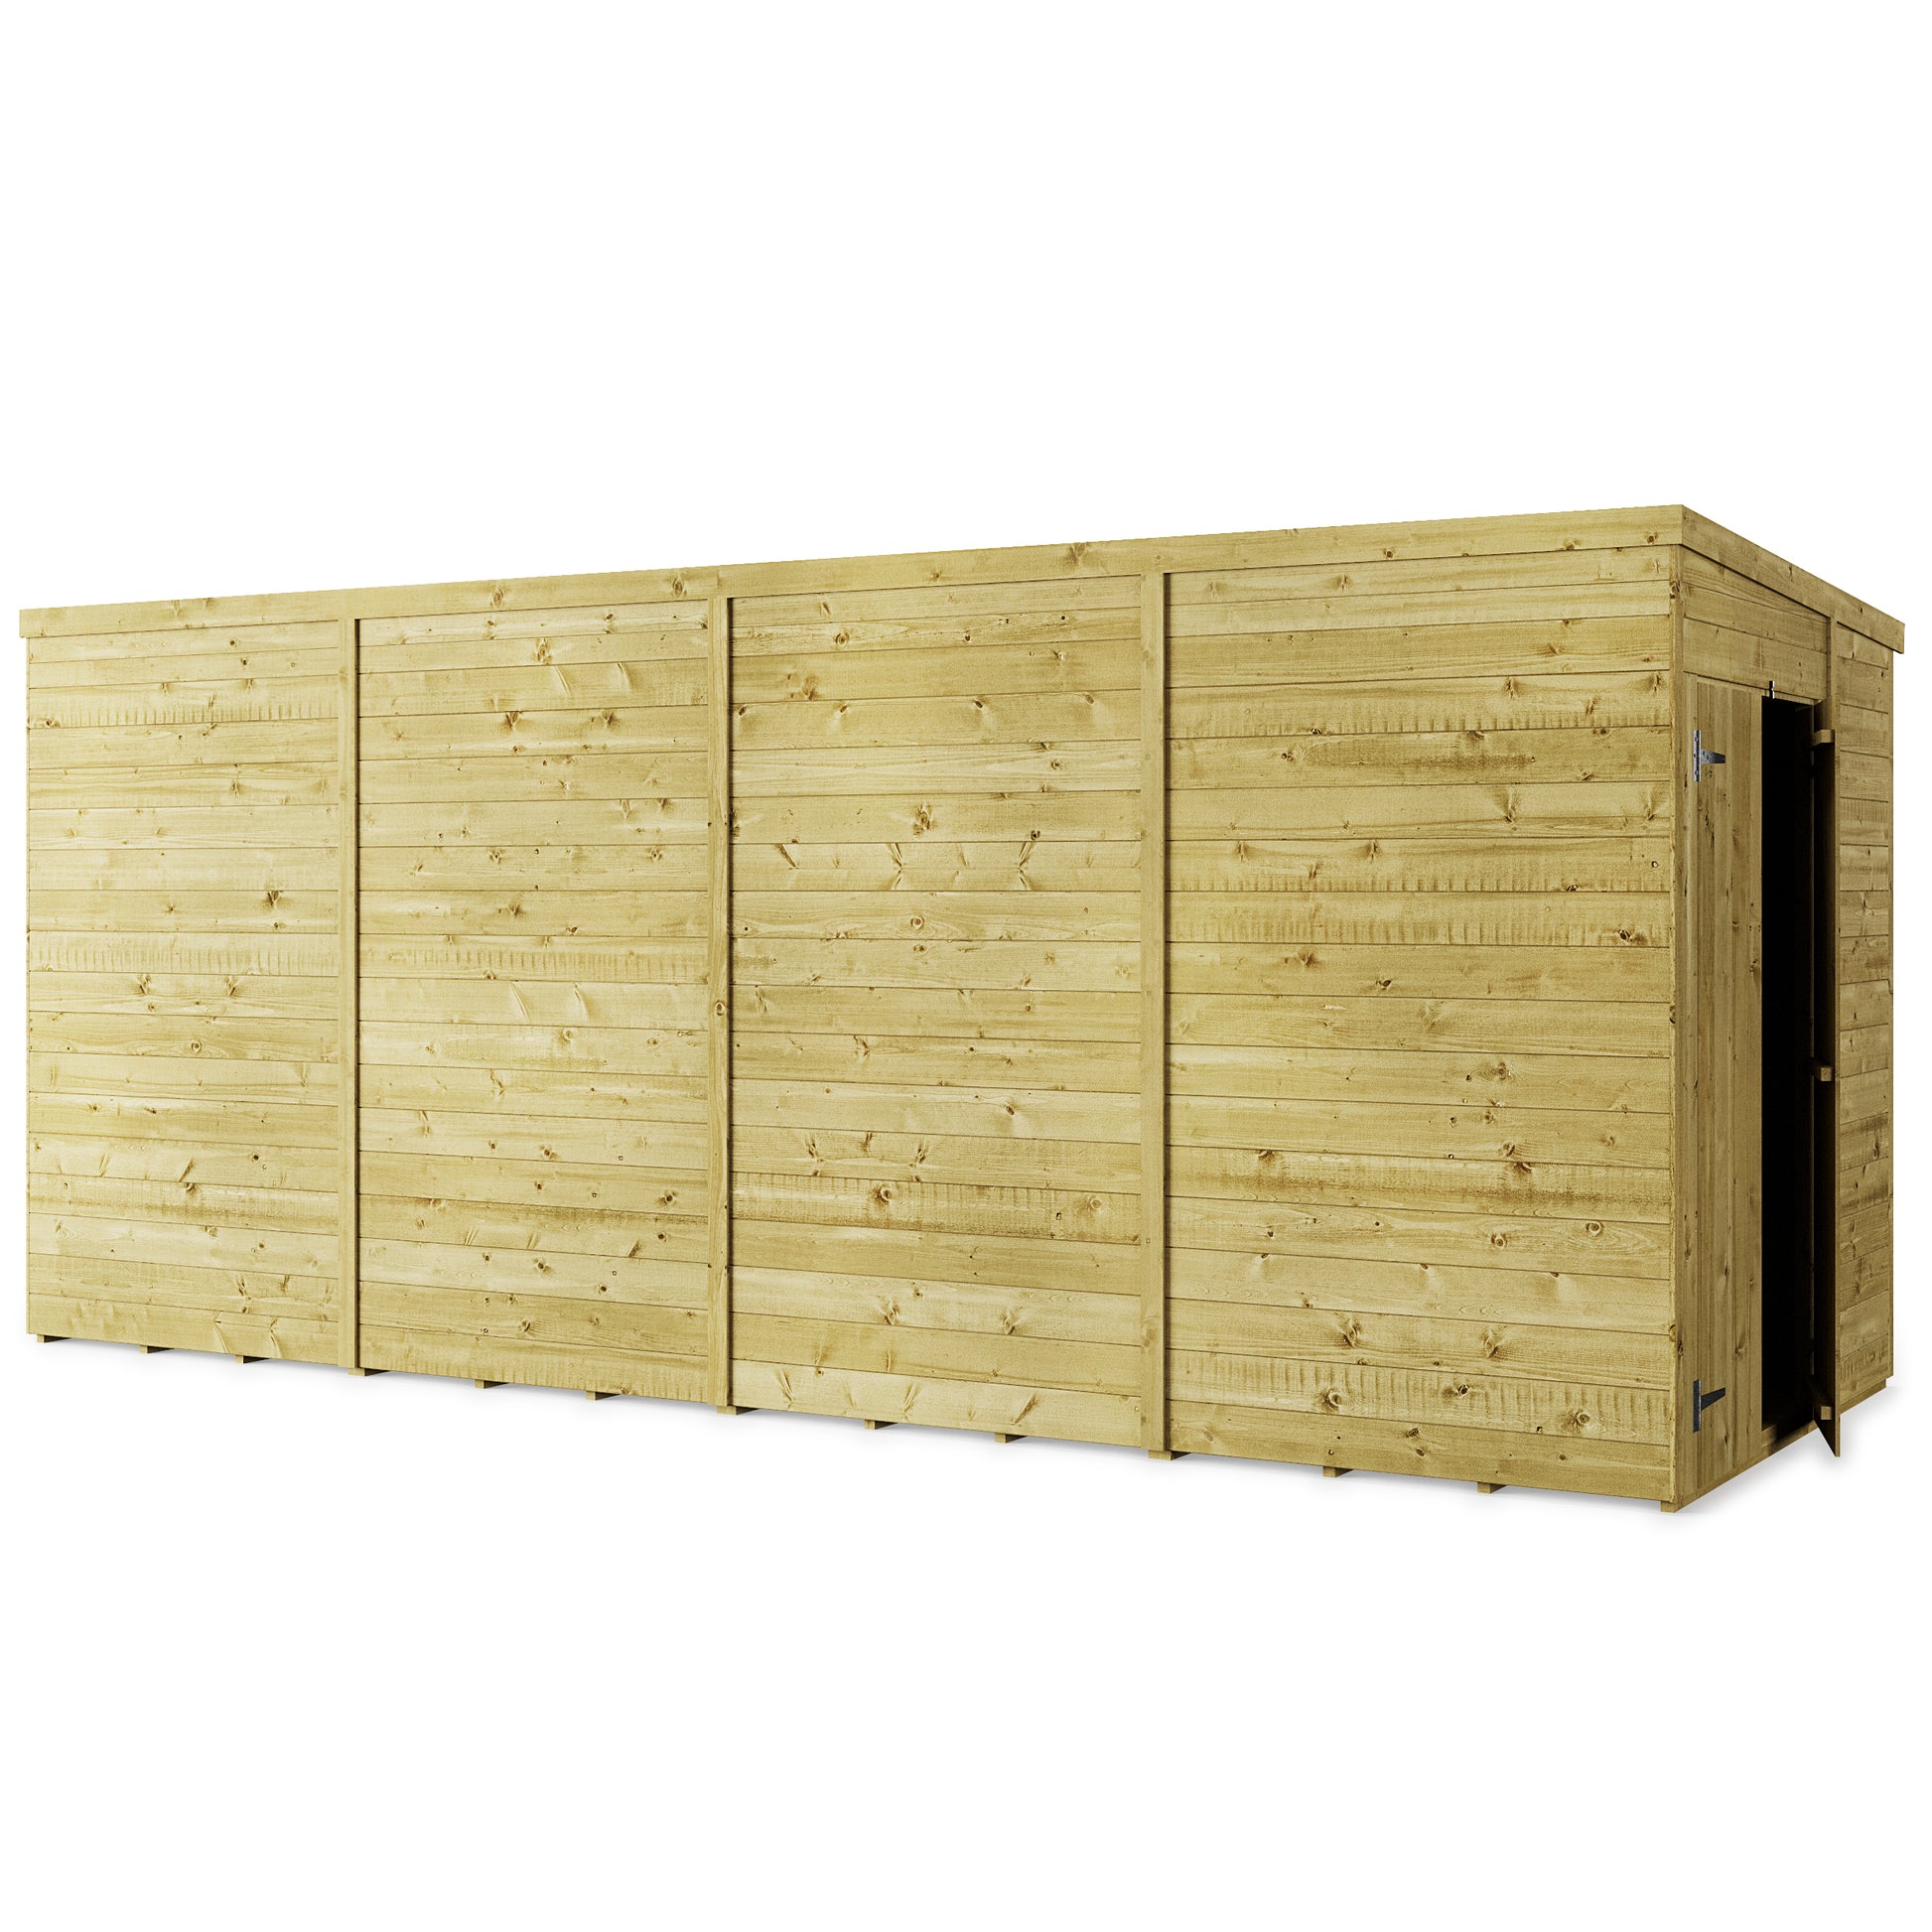 Store More 16 x 6 Tongue and Groove Pent Shed - Premium Garden